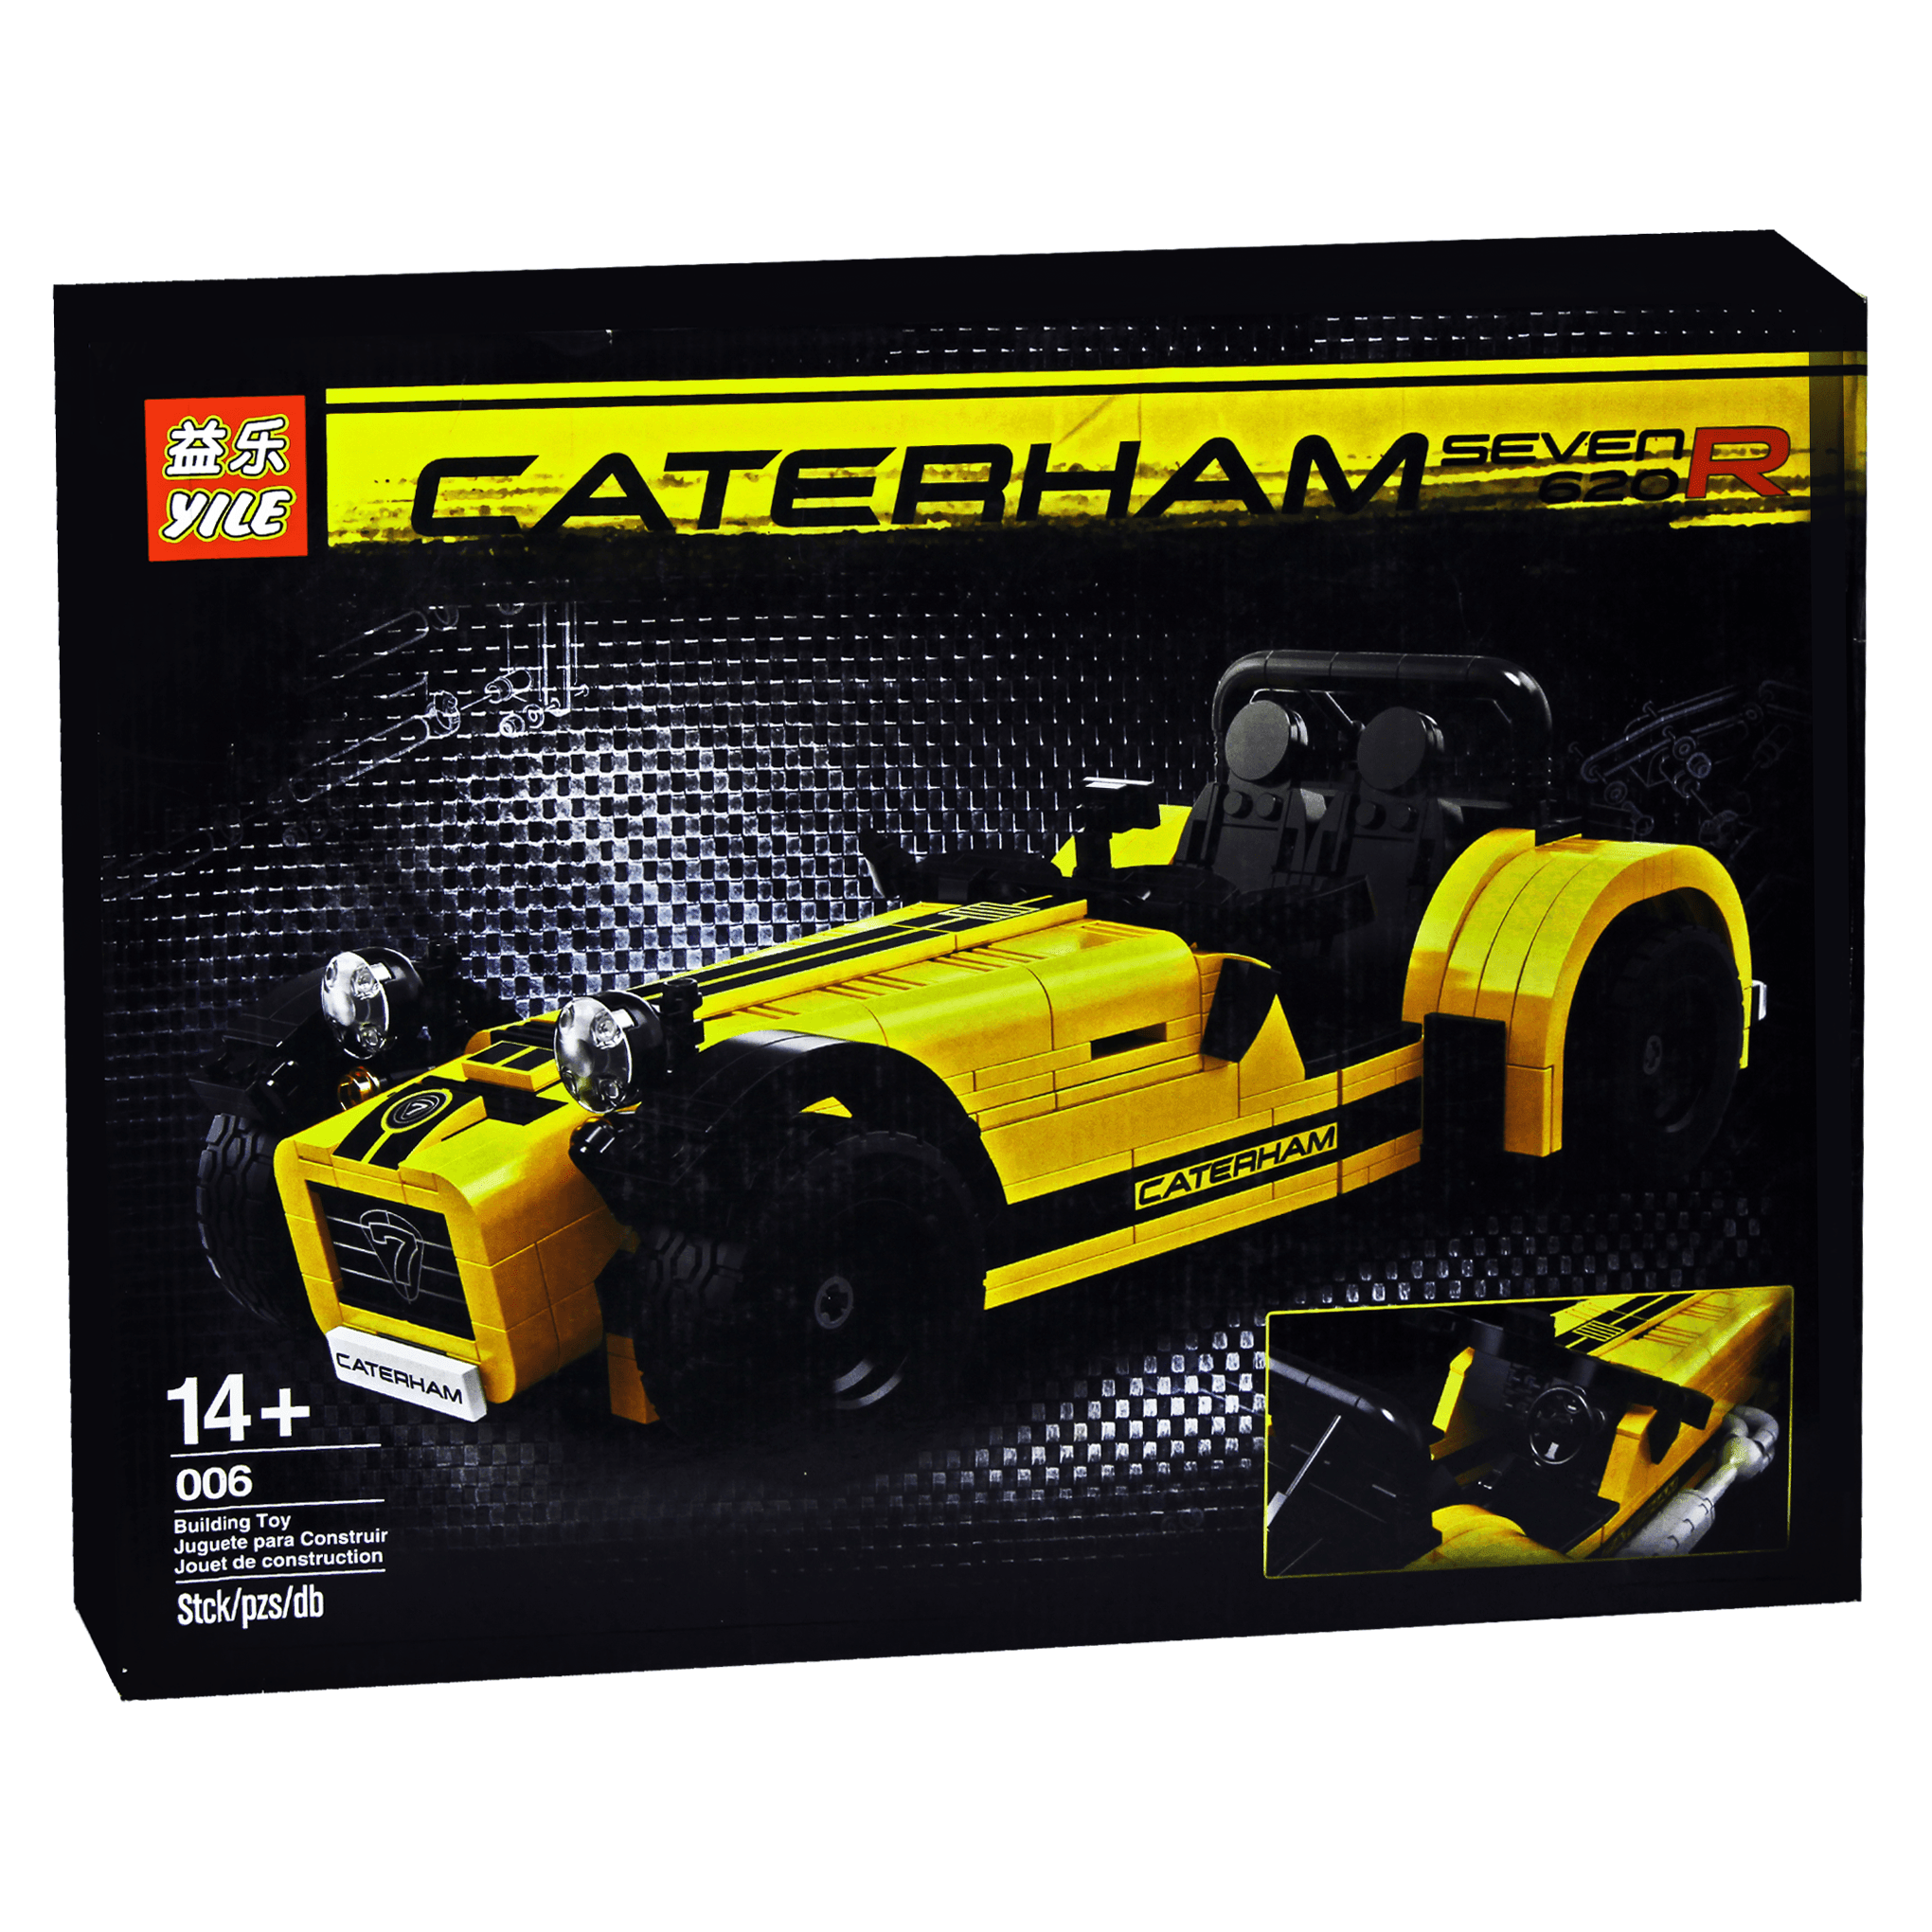 Yile Creator Caterham Seven 620R Sports Car Building Blocks Kit (771 Pcs) For age +14 - BumbleToys - 14 Years & Up, 18+, Boys, Building Sets & Blocks, Cars, Creator, LEGO, Toy Land